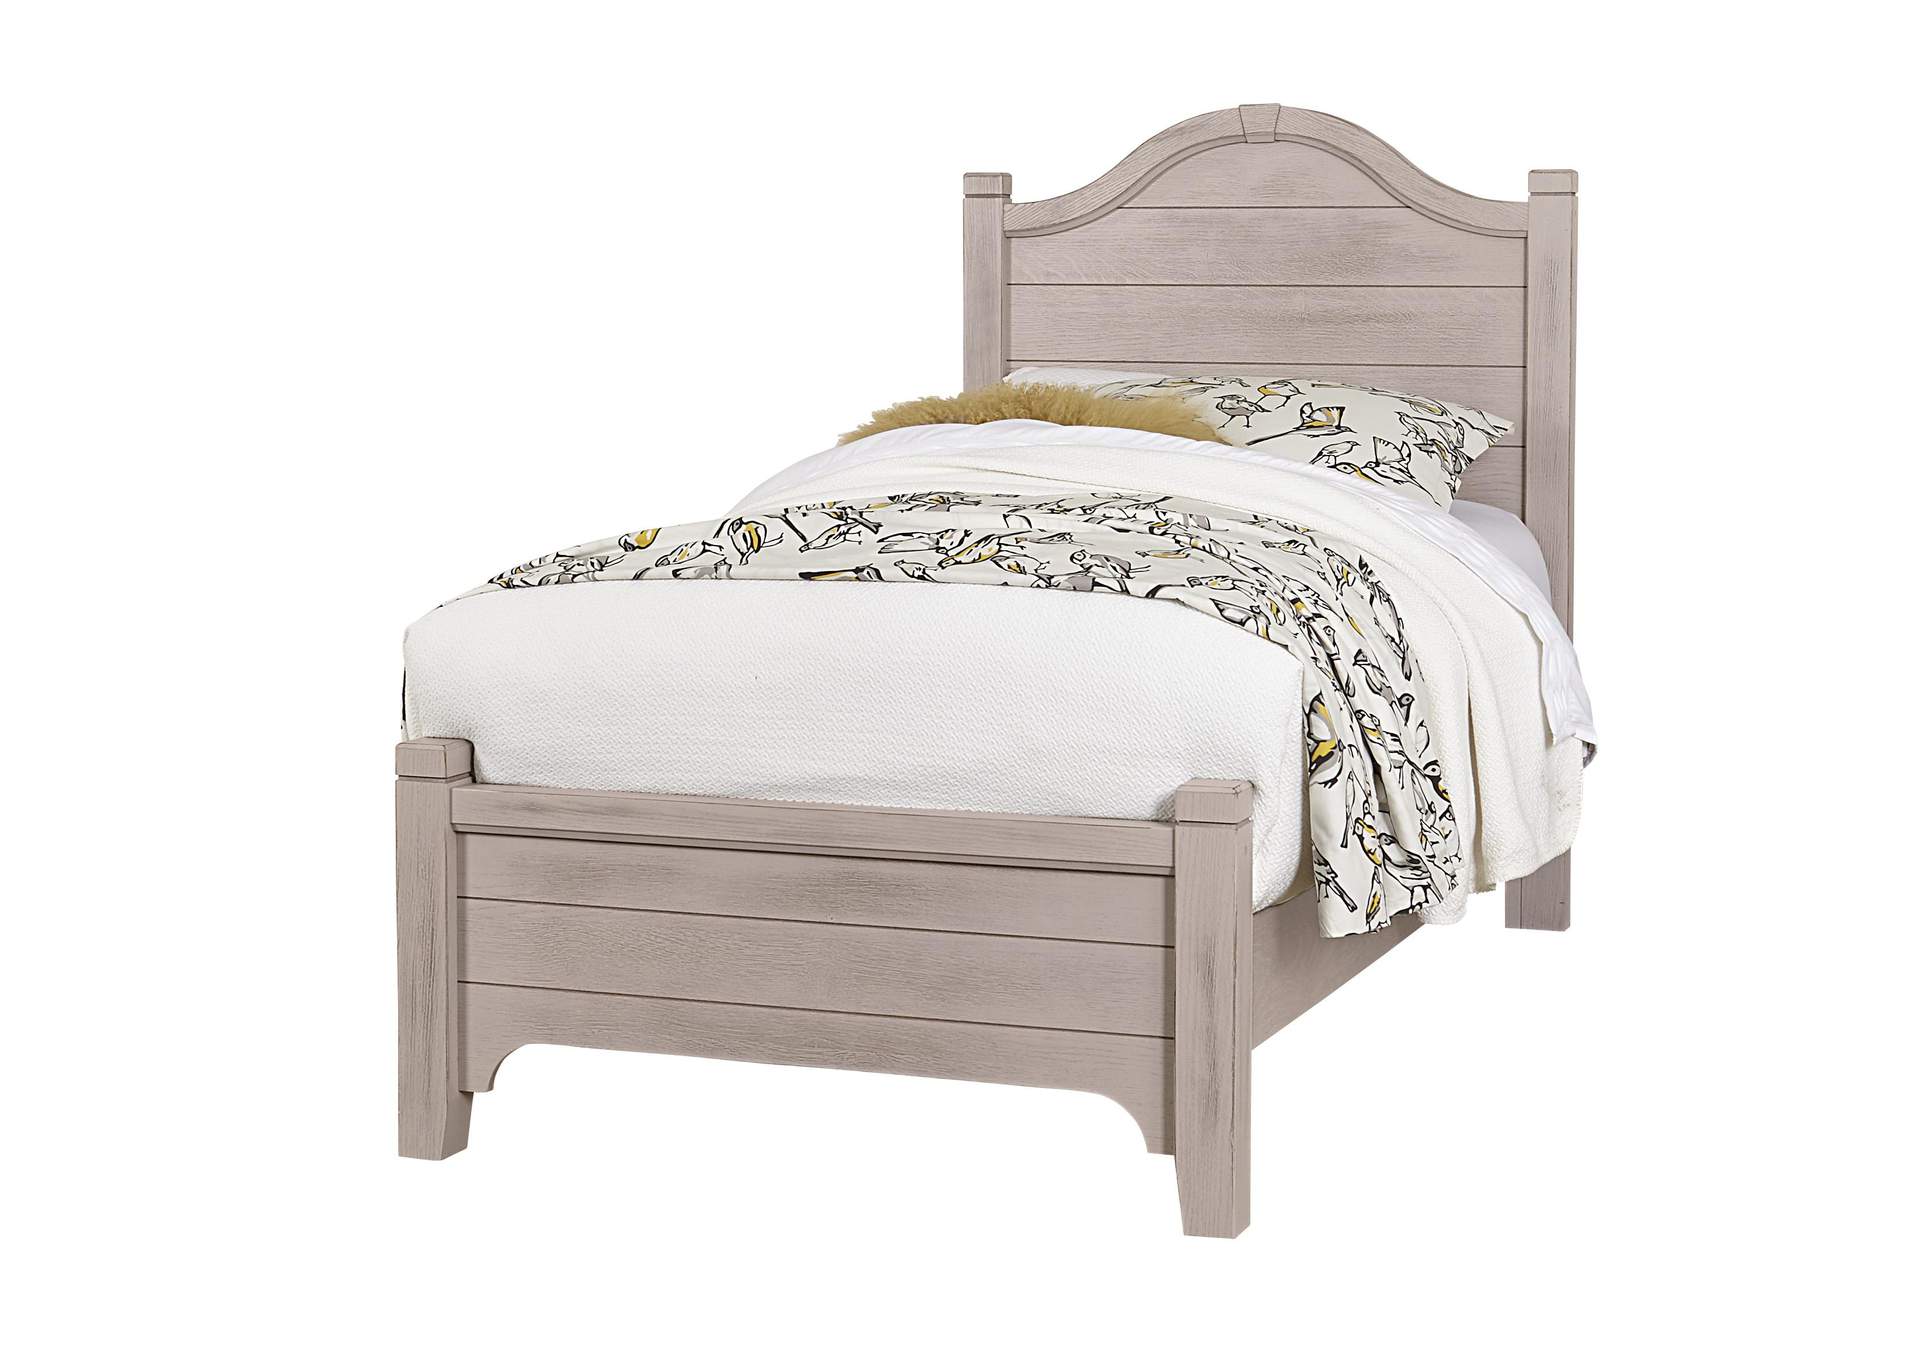 Bungalow Dover Grey/Folkstone Twin Arched Bed,Vaughan-Bassett